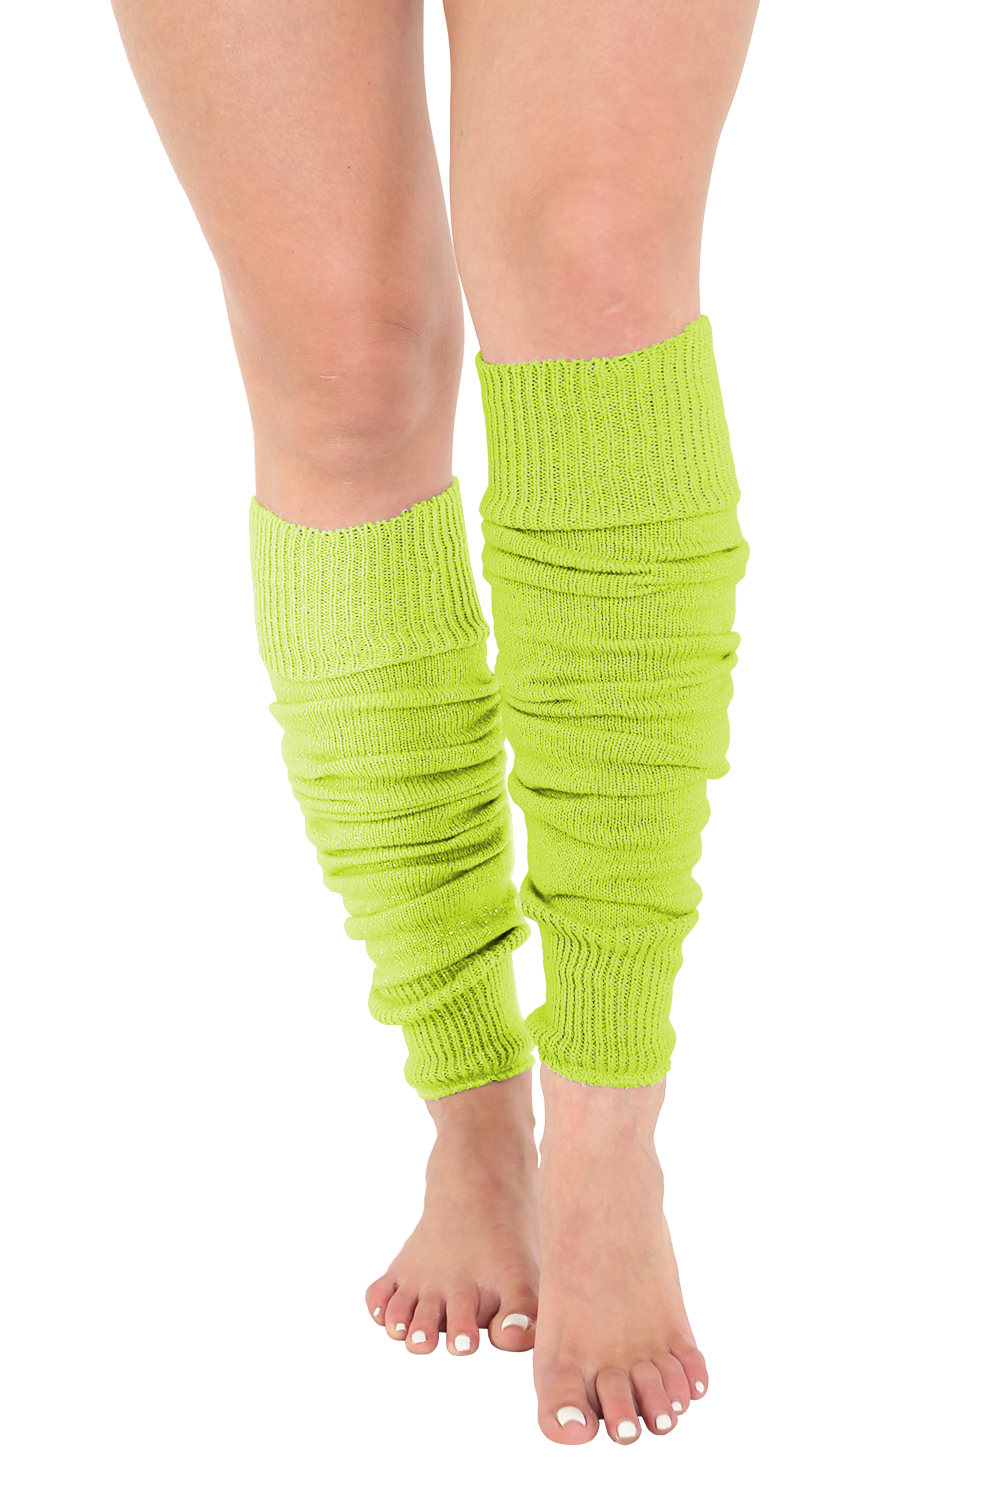 Crazy Chick Plain Lime Yellow Legwarmers (Pack of 12)